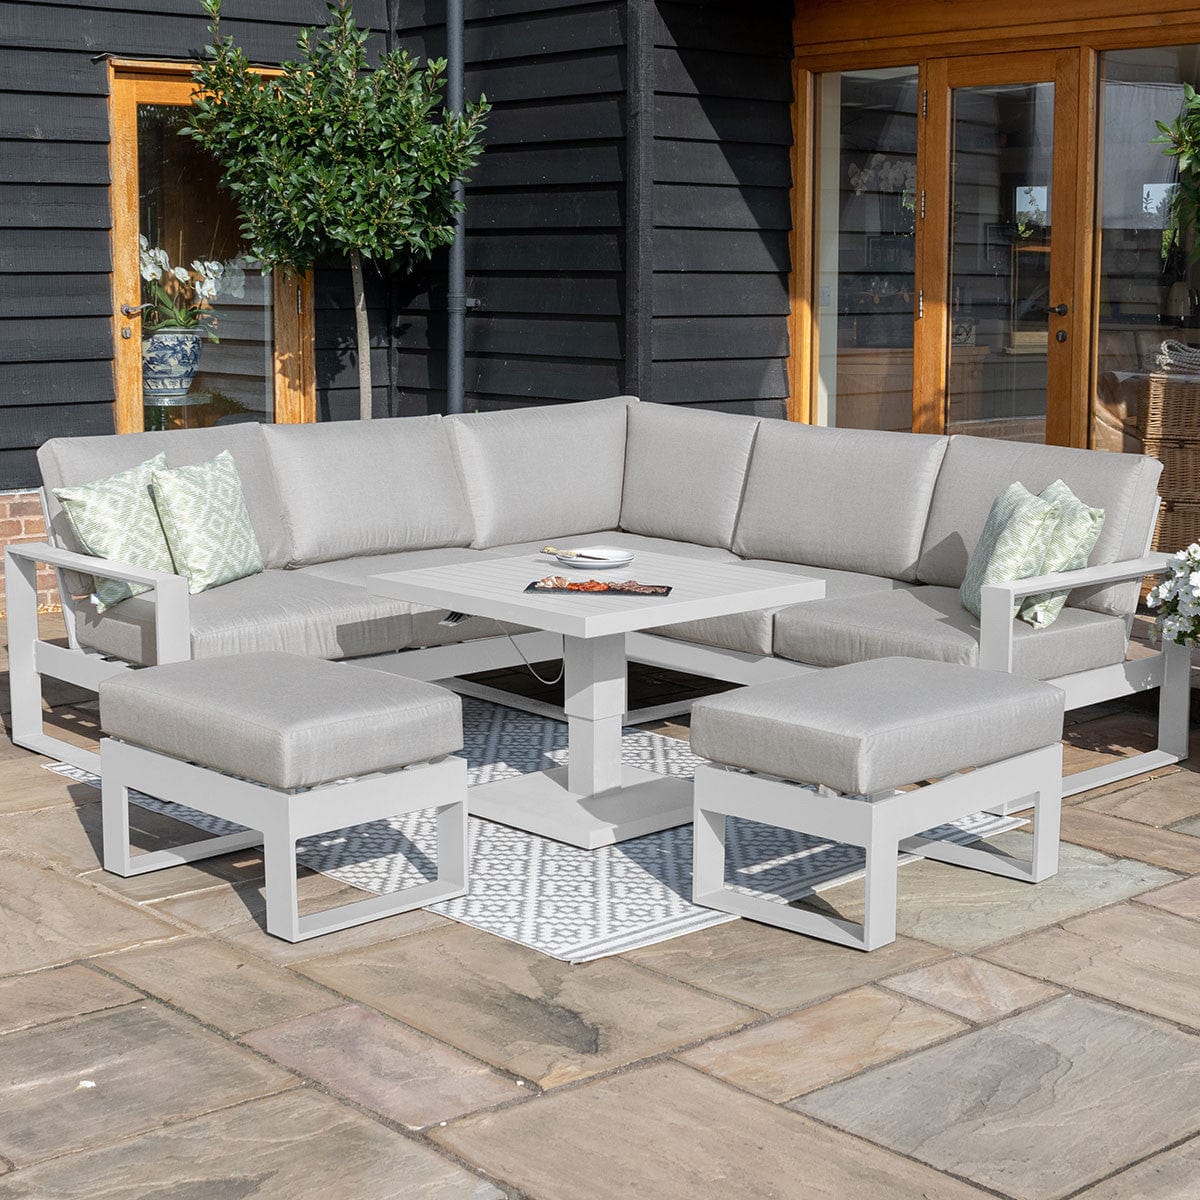 Maze Outdoors Amalfi Small Corner Dining with Square Rising Table and Footstools / White House of Isabella UK